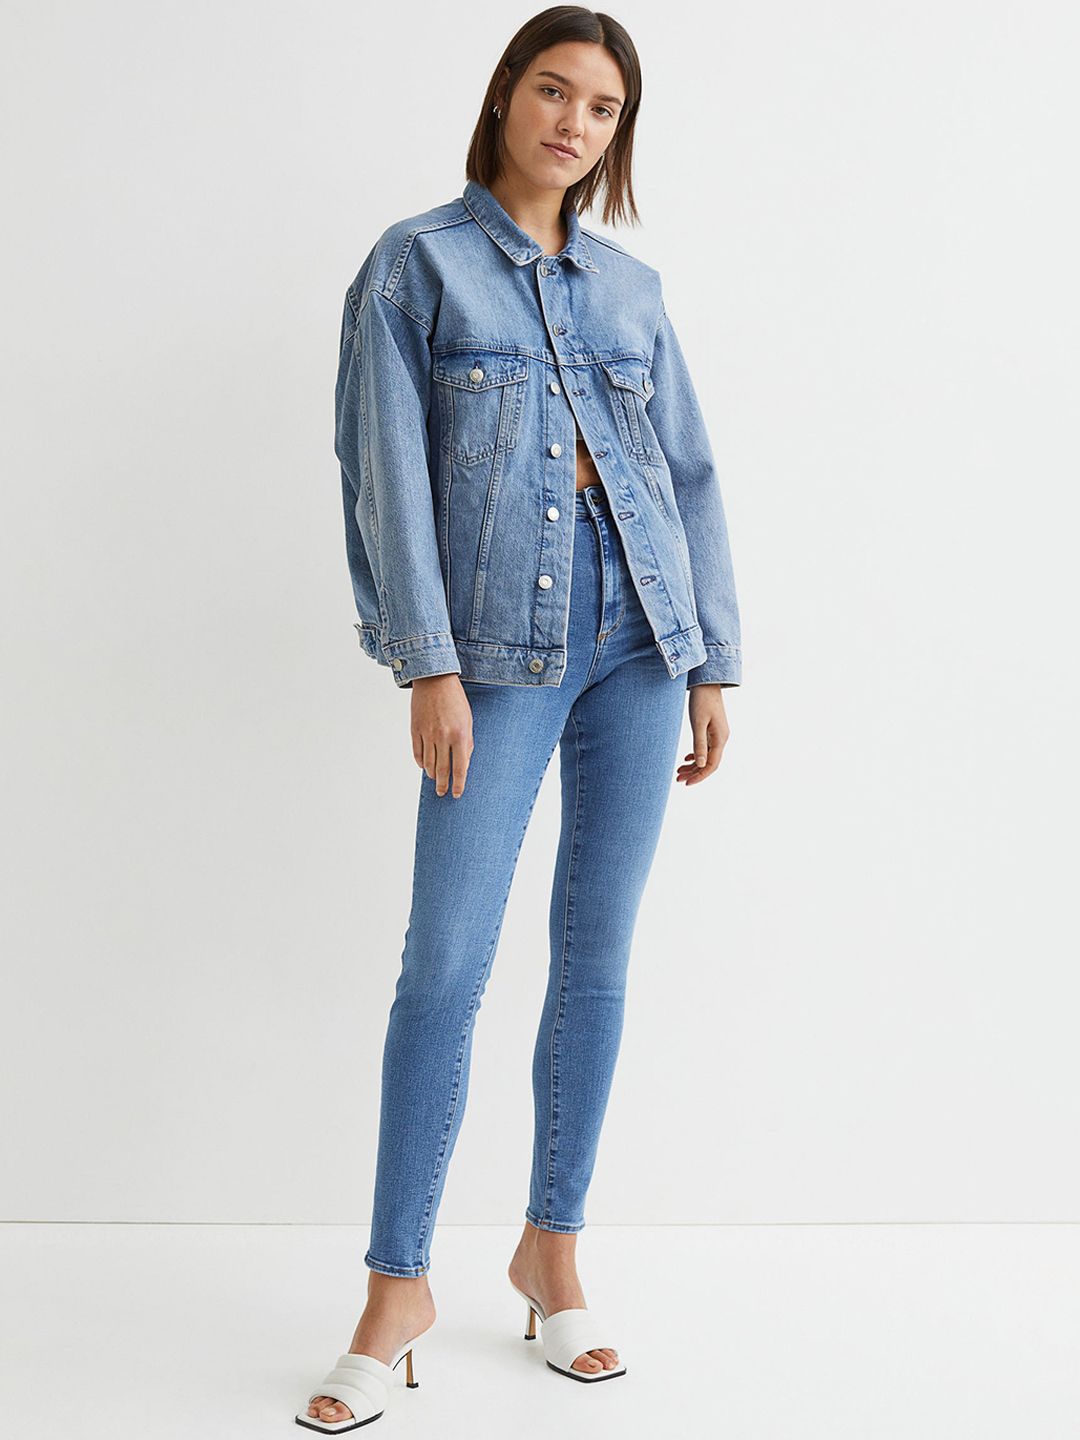 H&M Woman Blue Shaping High Jeans Price in India